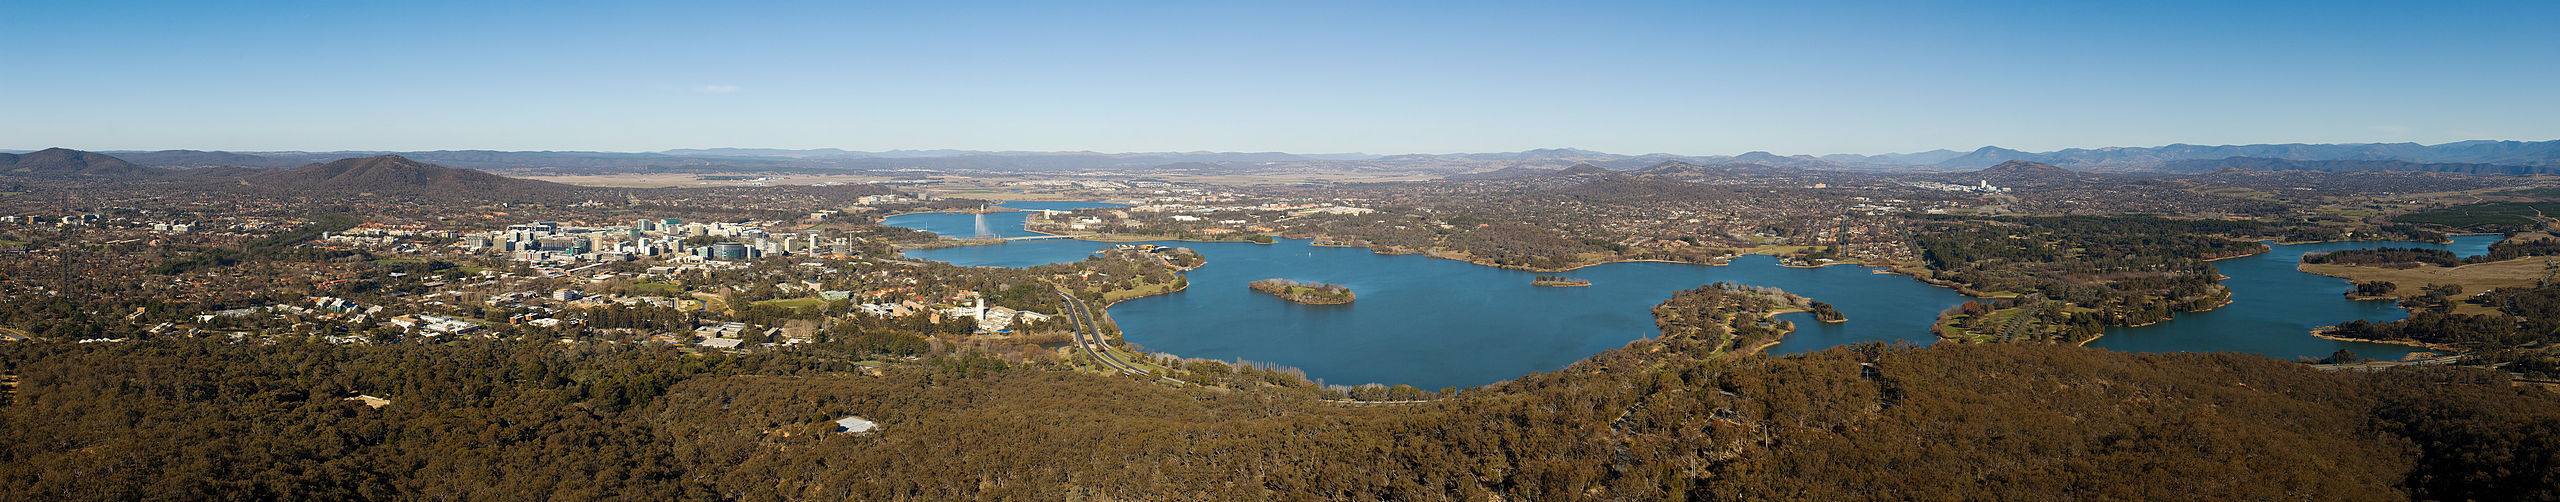 2560px-Canberra_From_Black_Mountain_Tower.jpg